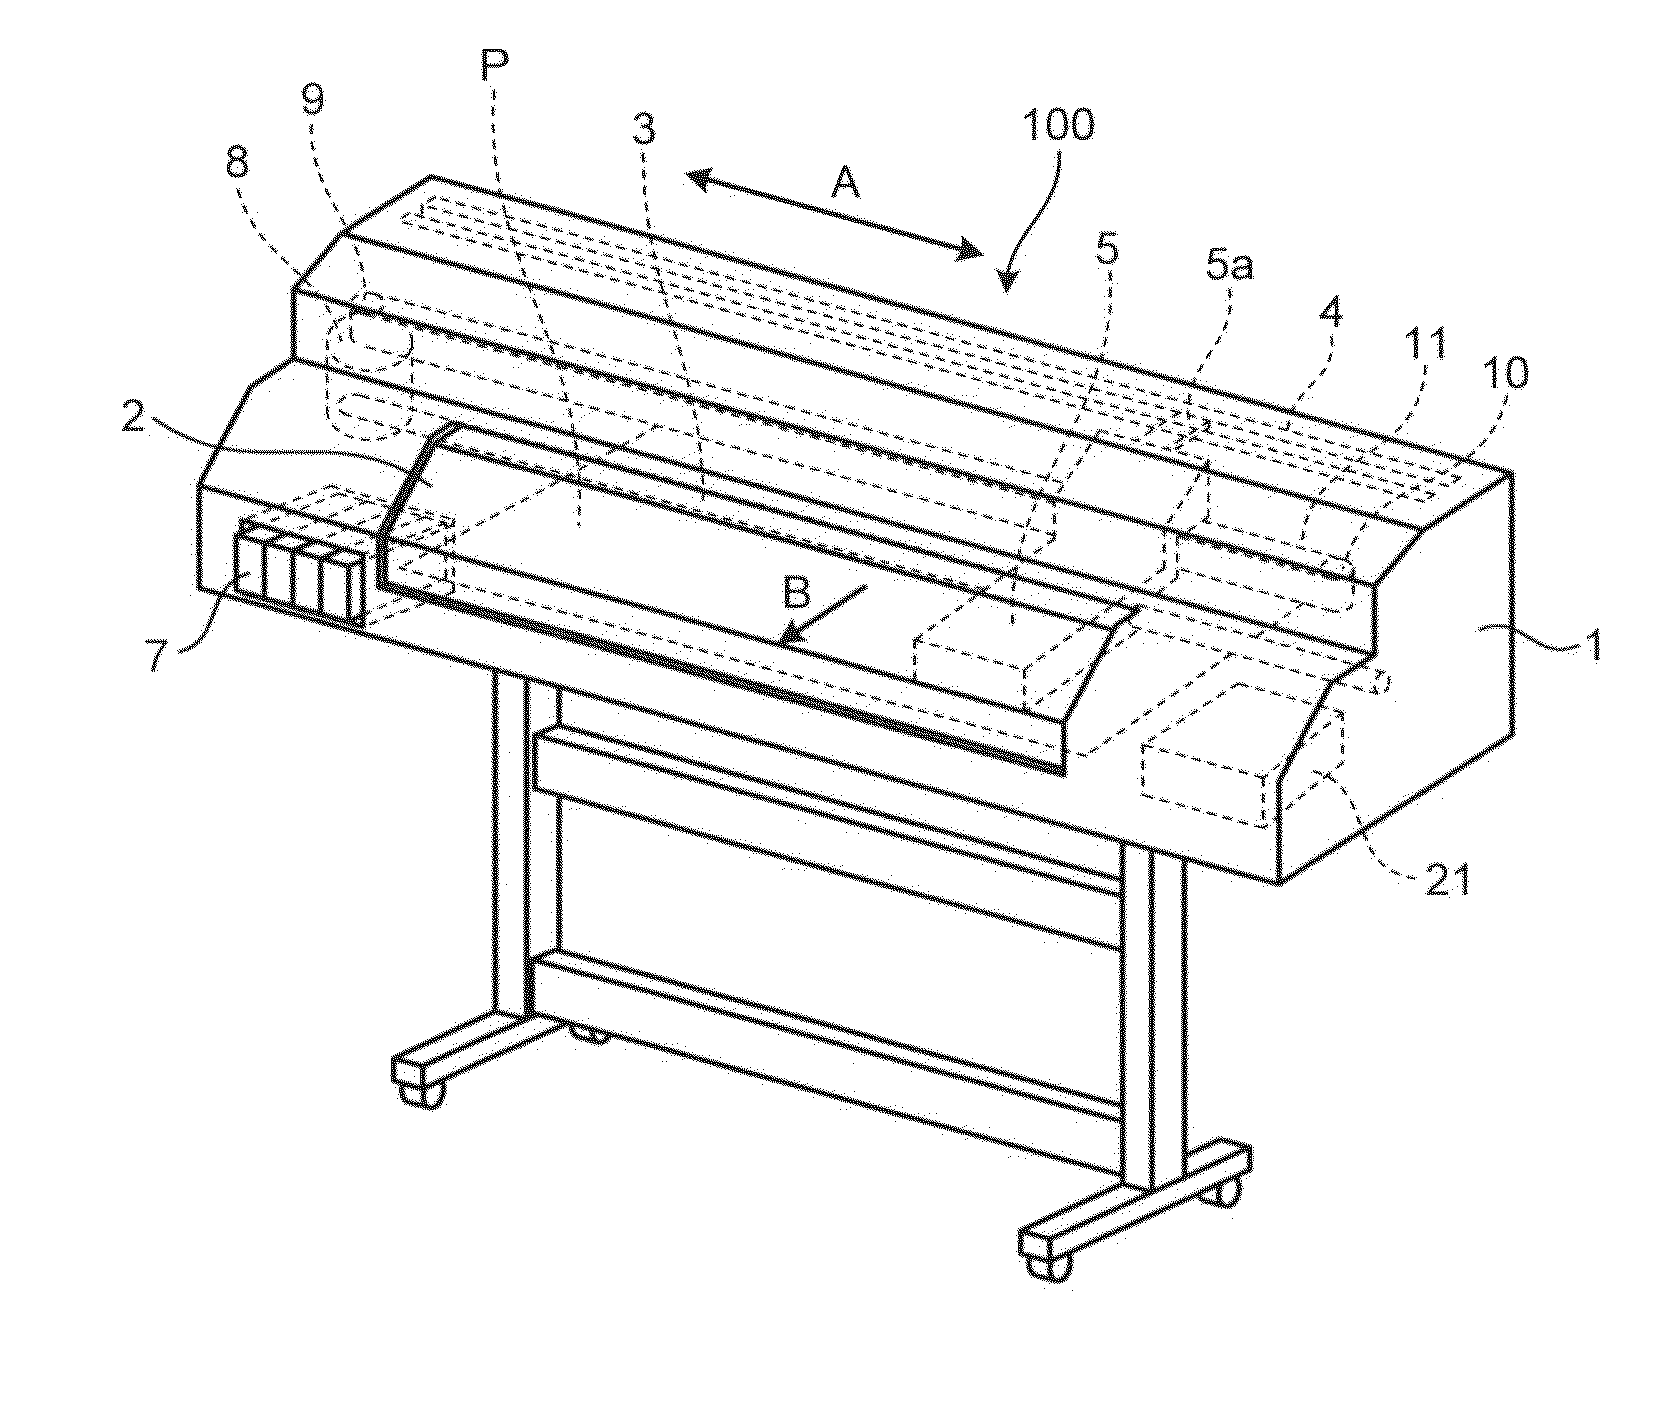 Color measuring device, image forming apparatus and computer program product